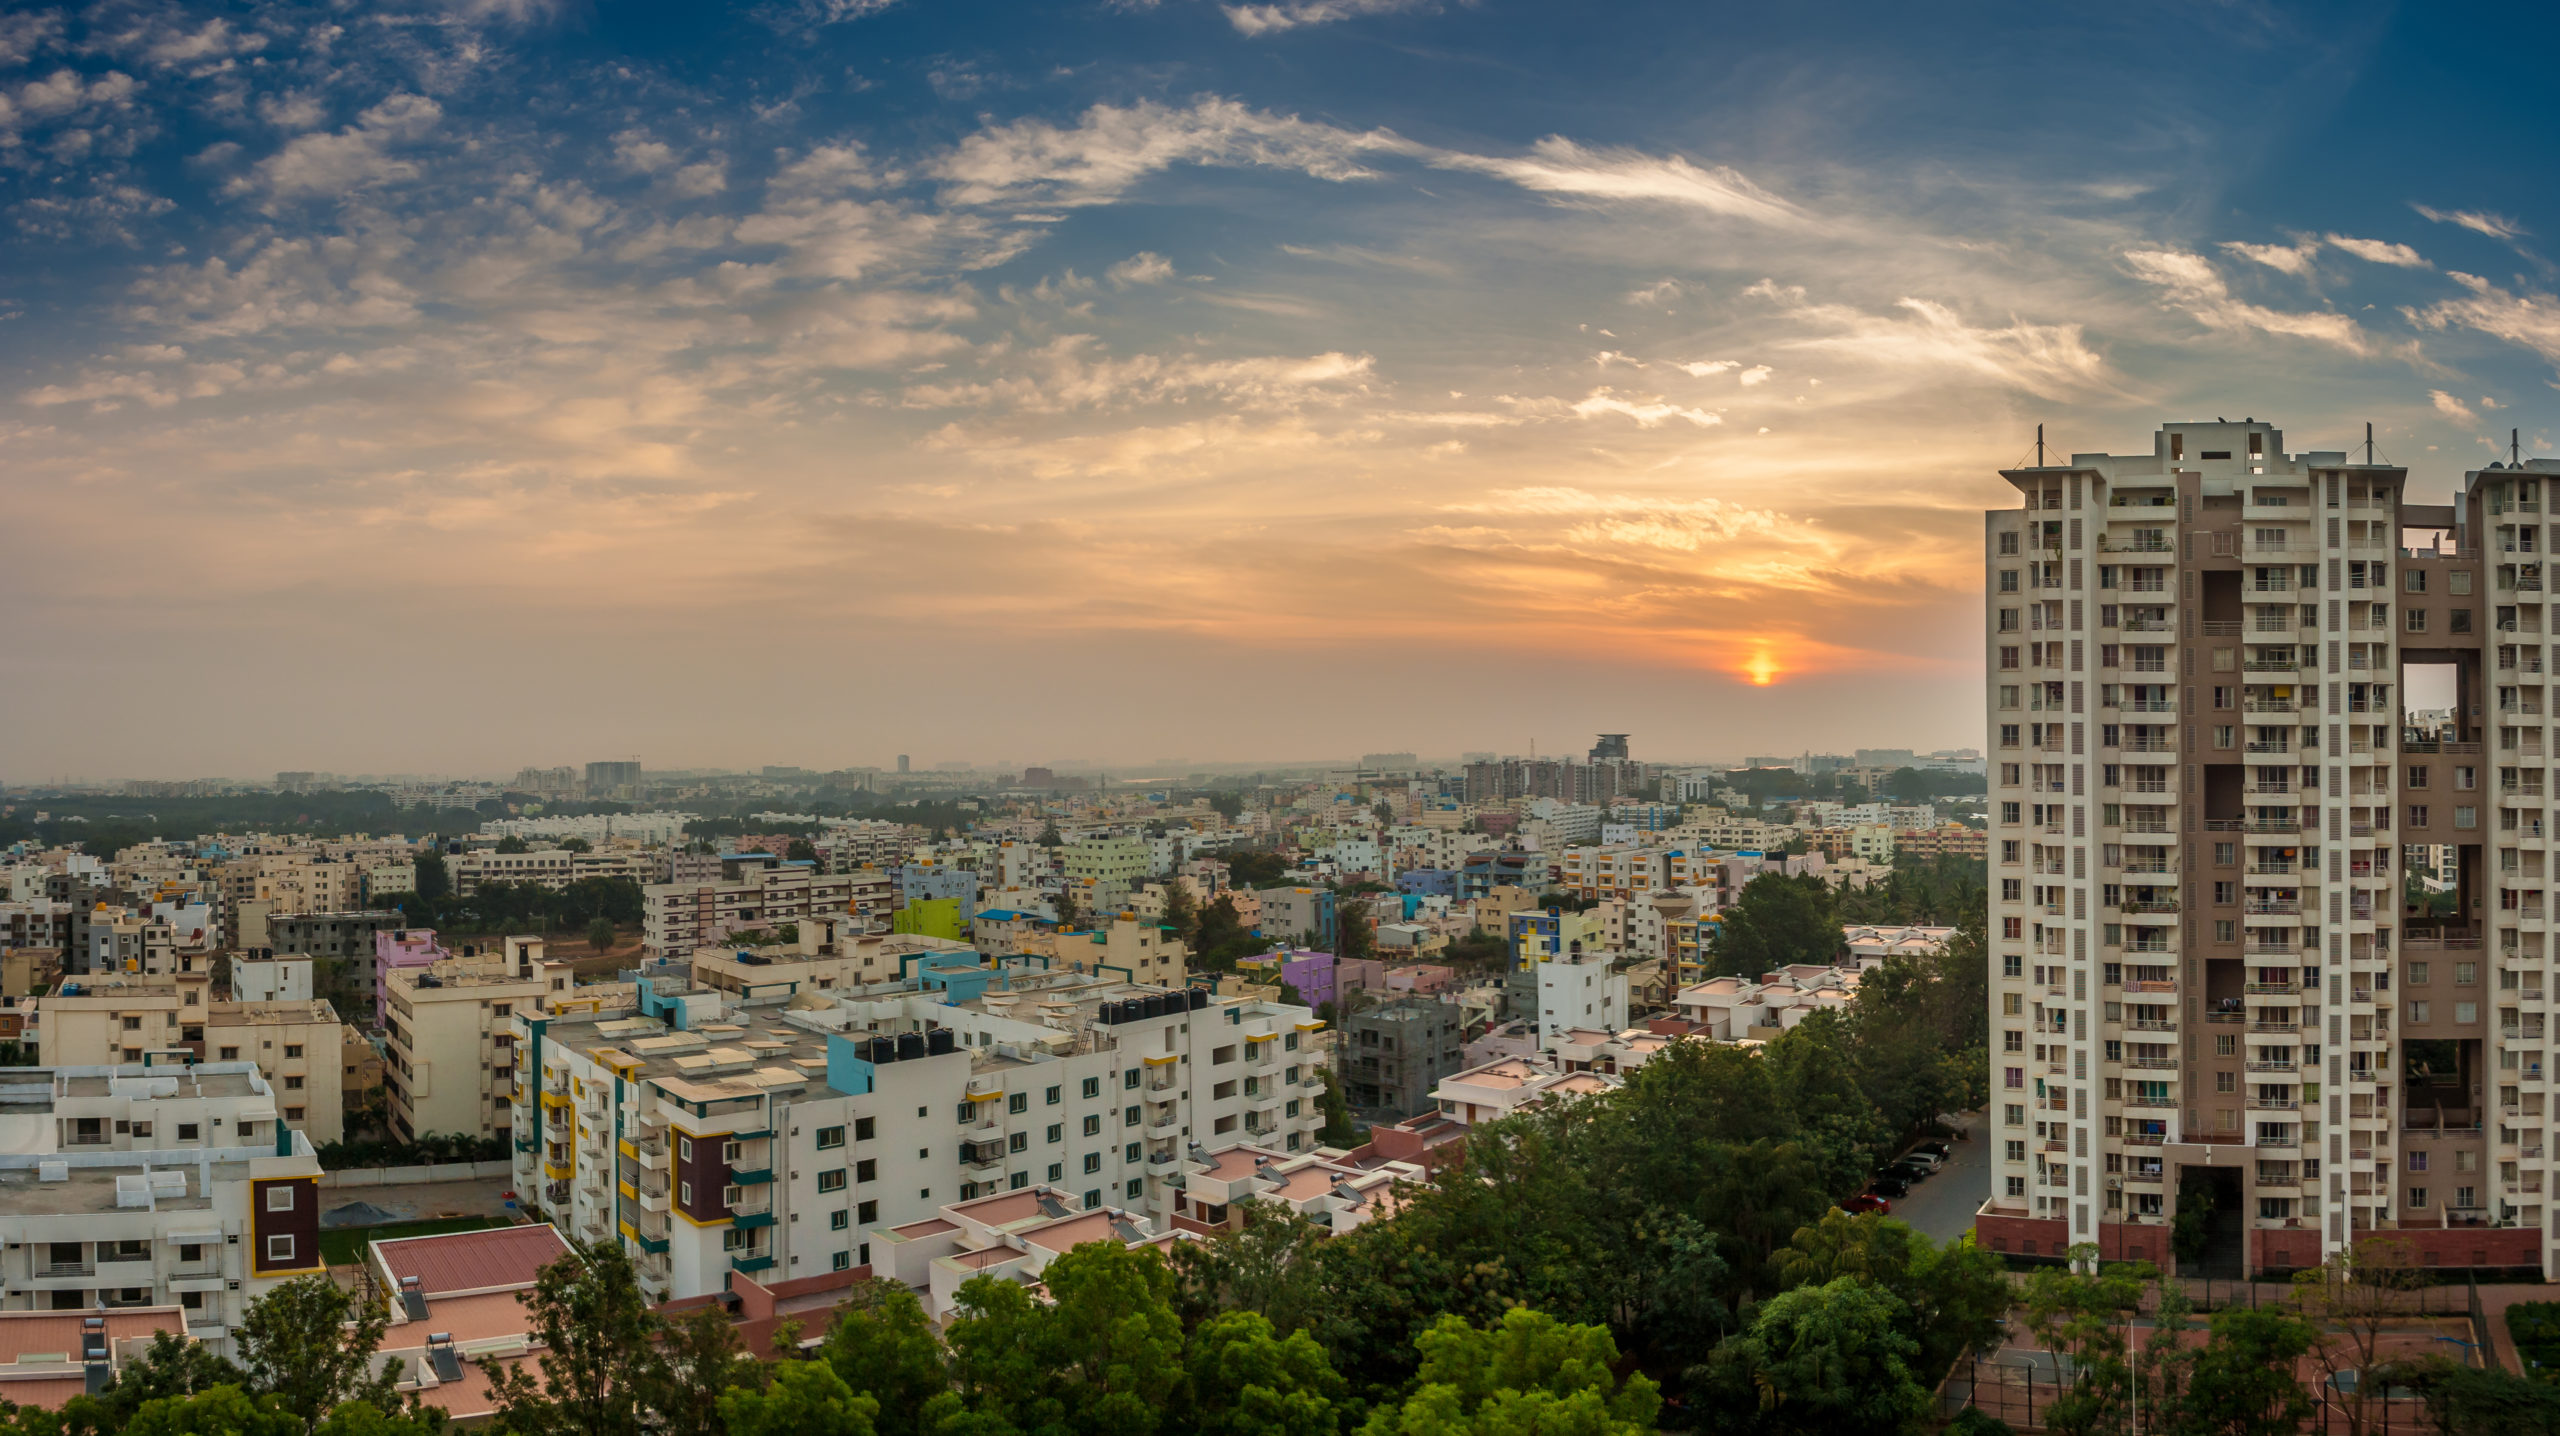 Why Should You Choose Ayanambakkam as Your Next Neighborhood?